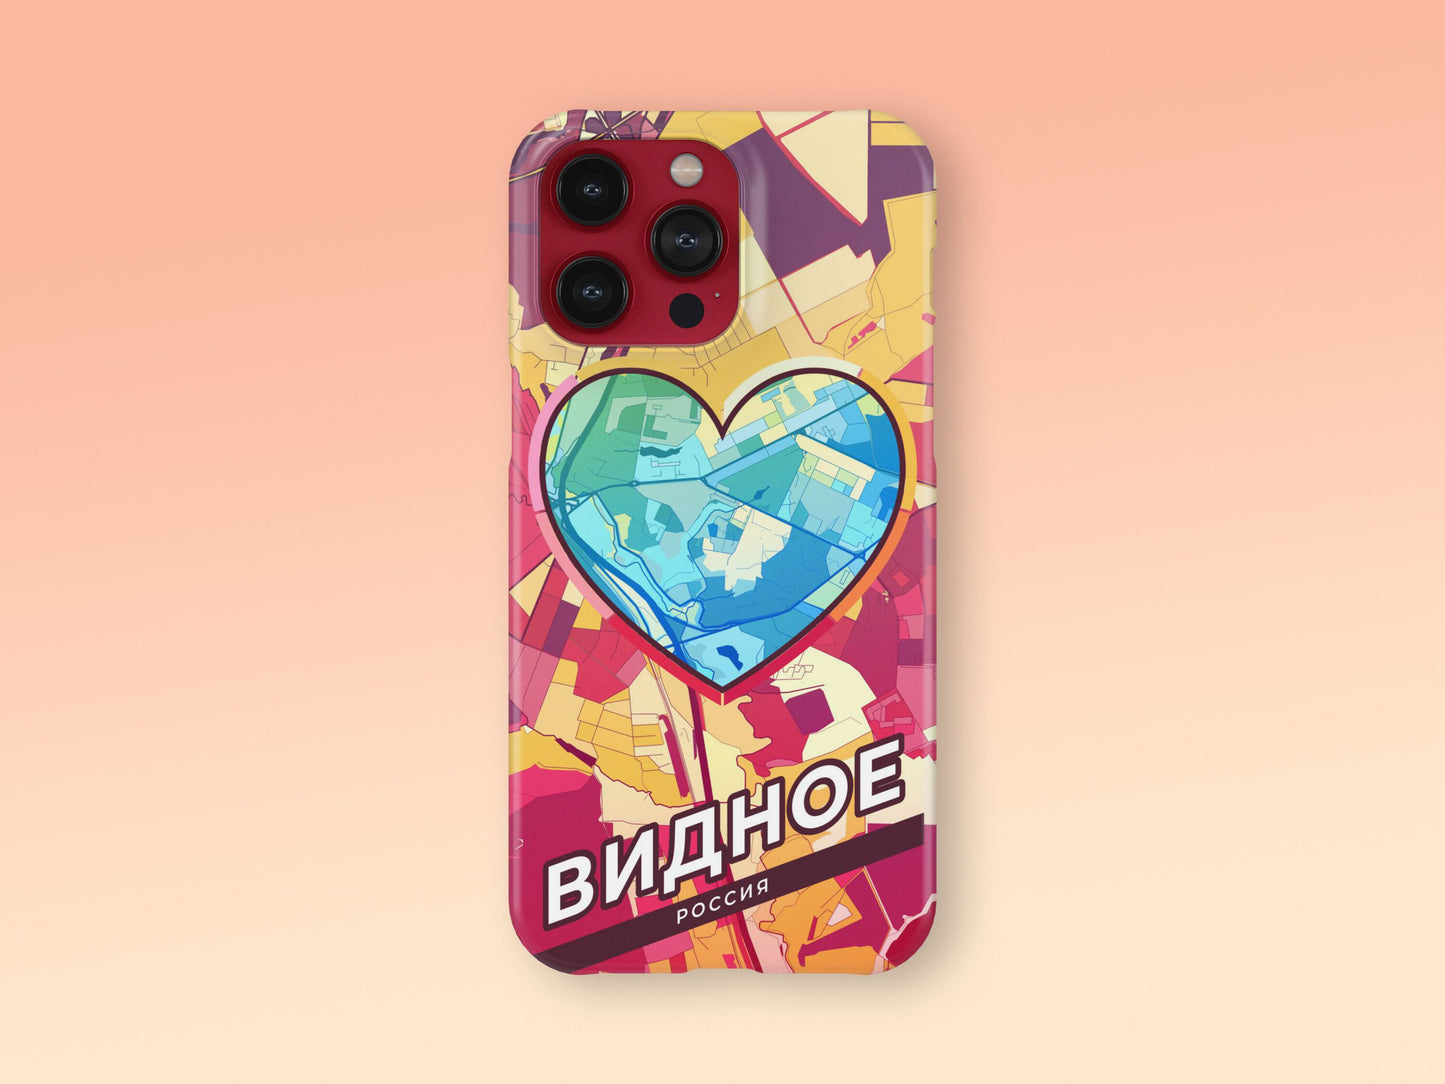 Vidnoye Russia slim phone case with colorful icon 2